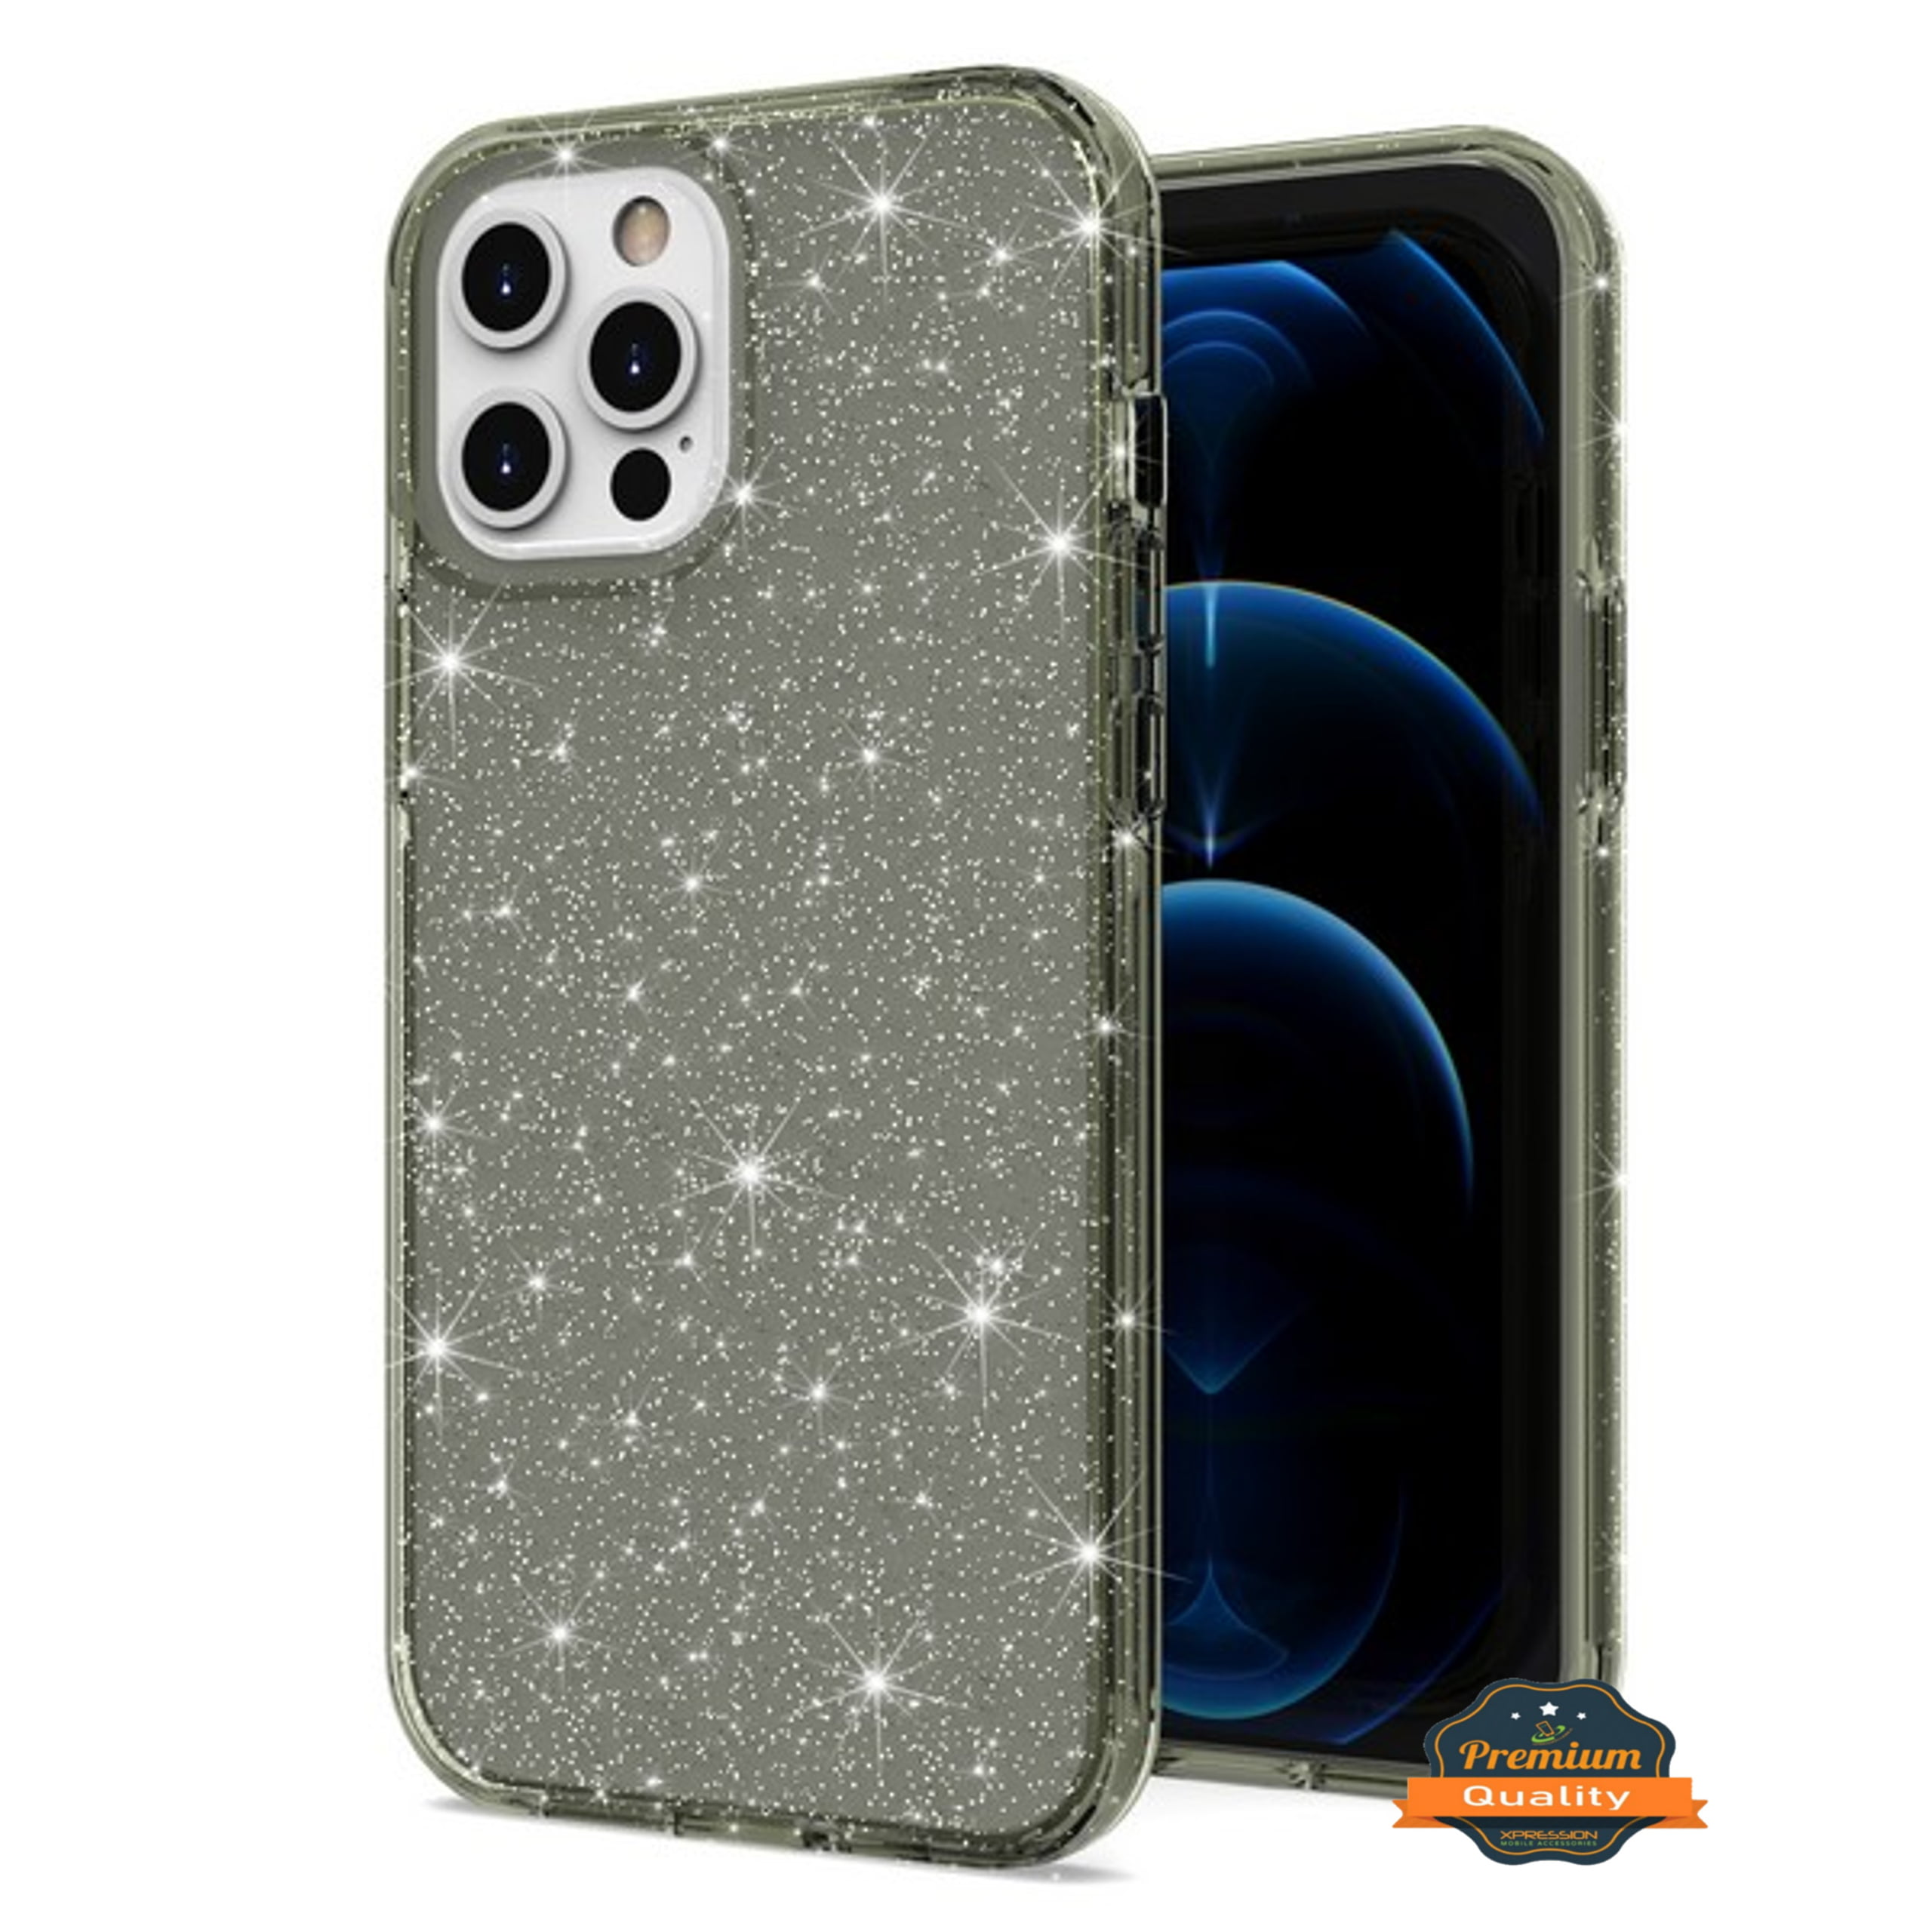 For Boost Mobile Celero 5G Glitter Sparkle Bling Shiny Thin Ultra Slim  Hybrid Shockproof Rubber Silicone Soft TPU Gel Phone Case Cover by Xpression  [Black] 